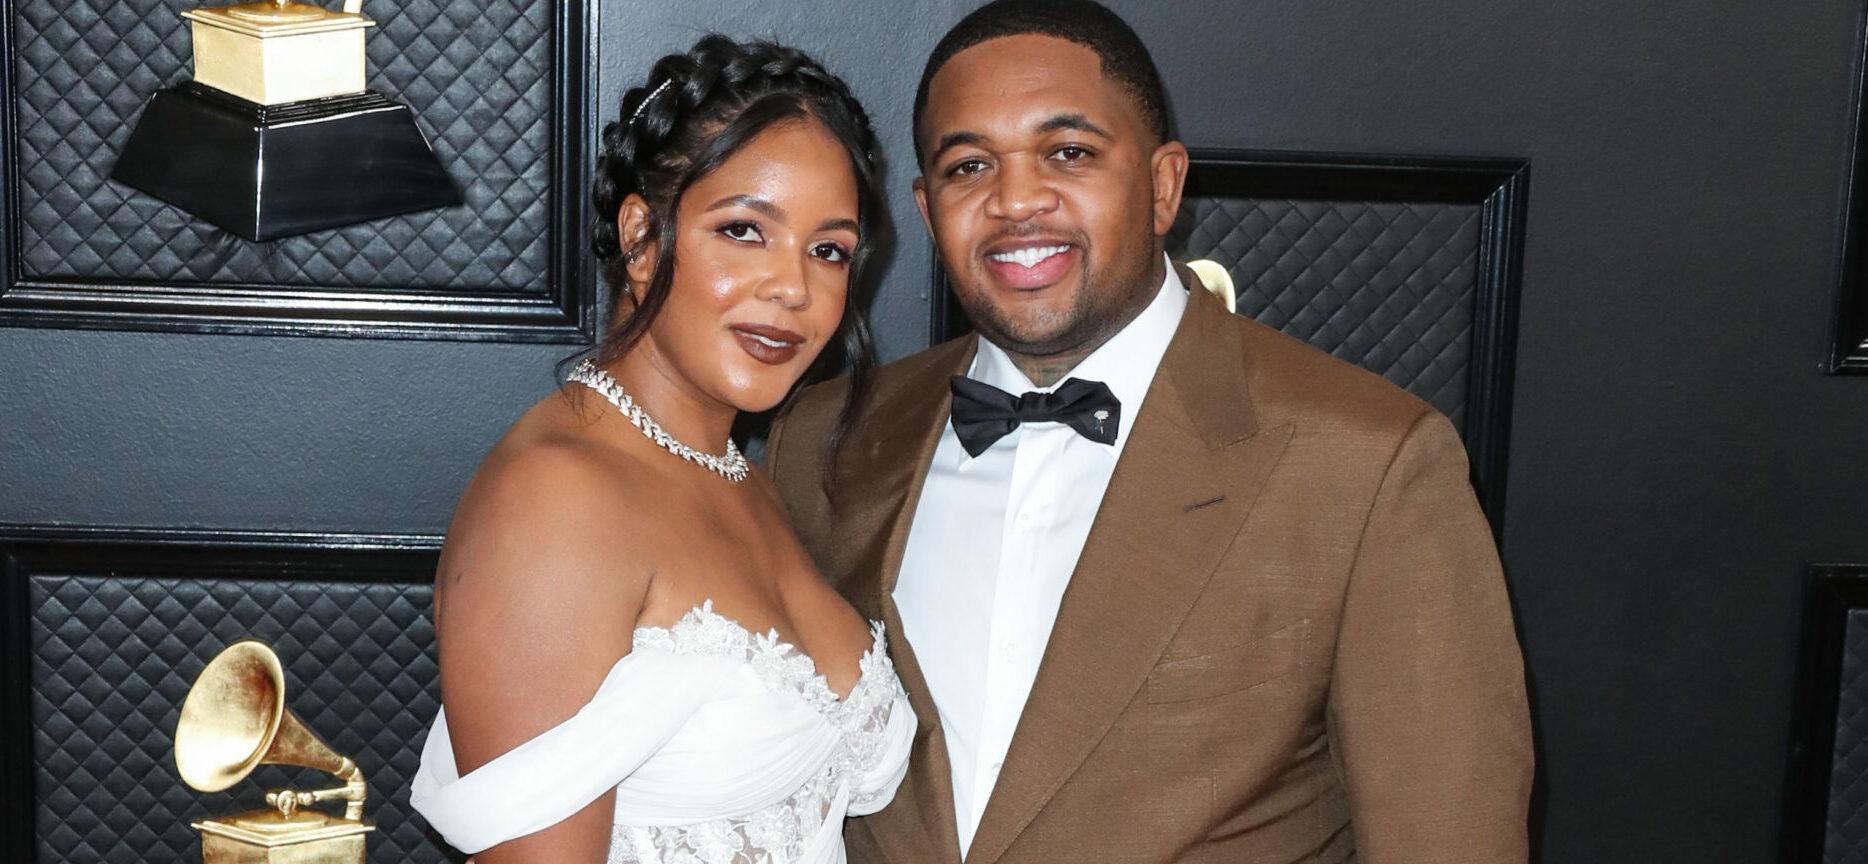 DJ MUSTARD and wife CHANEL THIERRY divorced